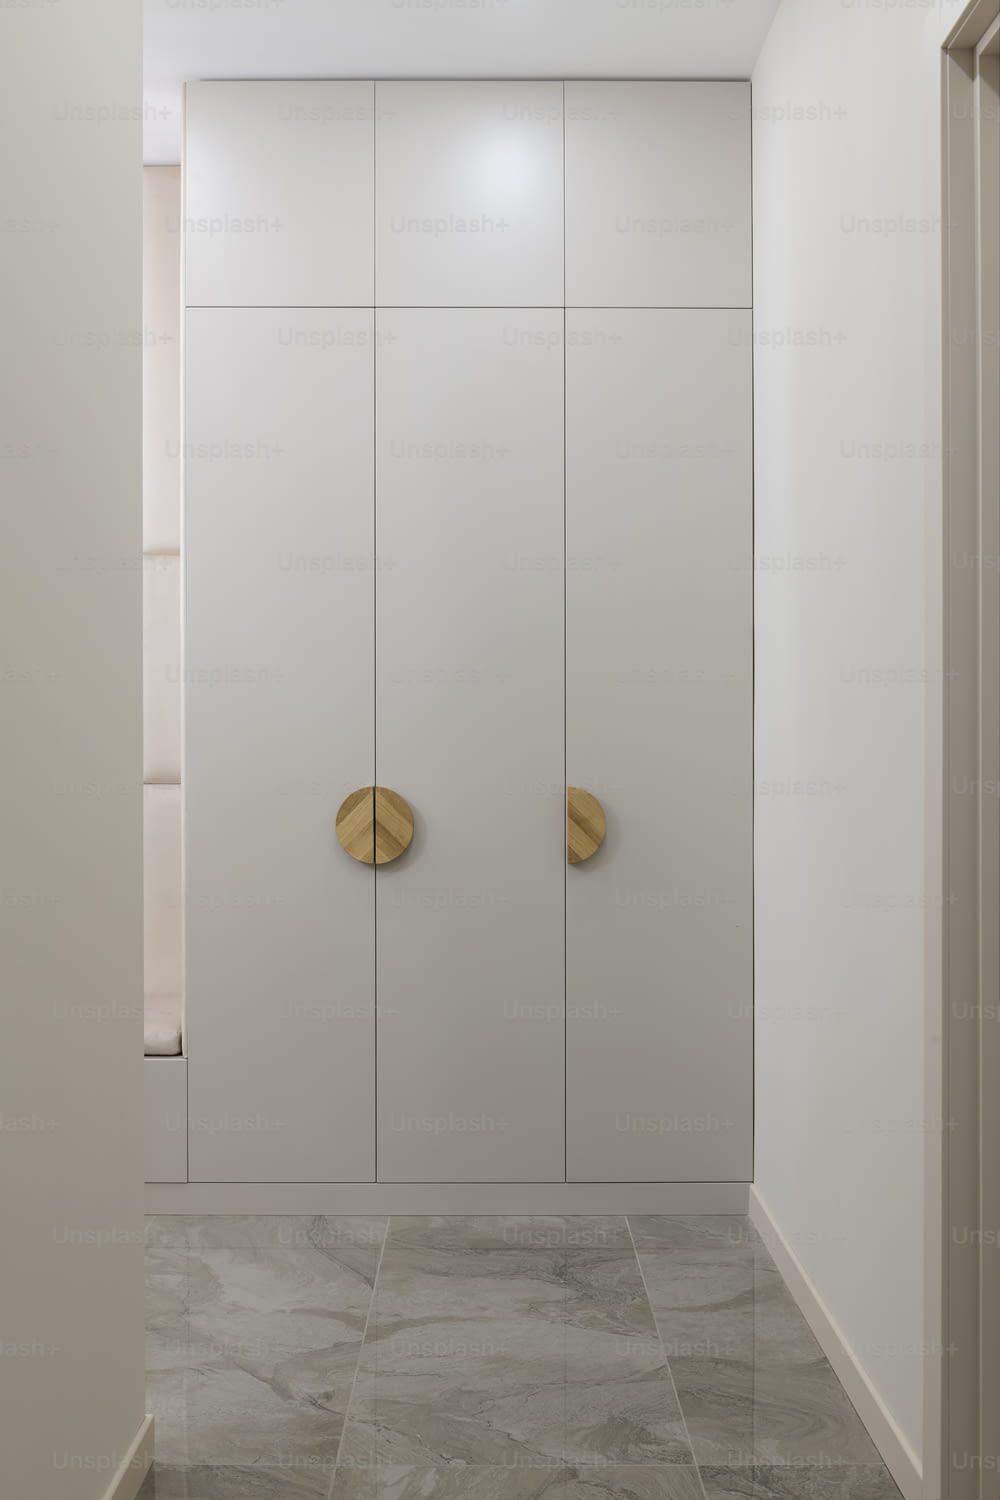 a bathroom with a white wall and two gold doors